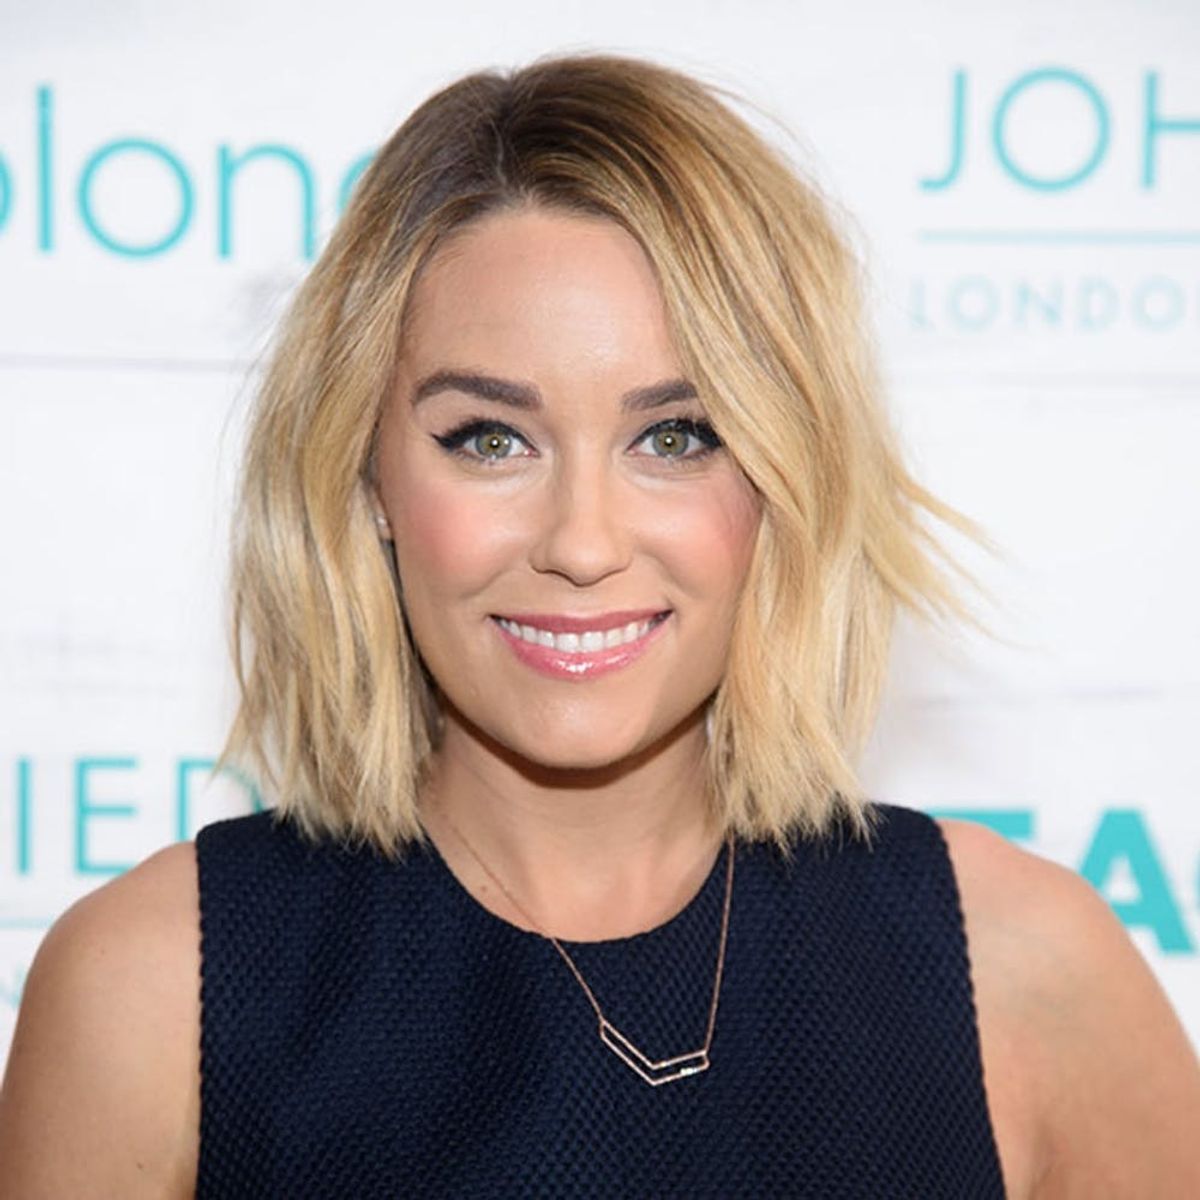 You’ll Never Guess the Affordable Place You Can Shop Lauren Conrad’s Makeup